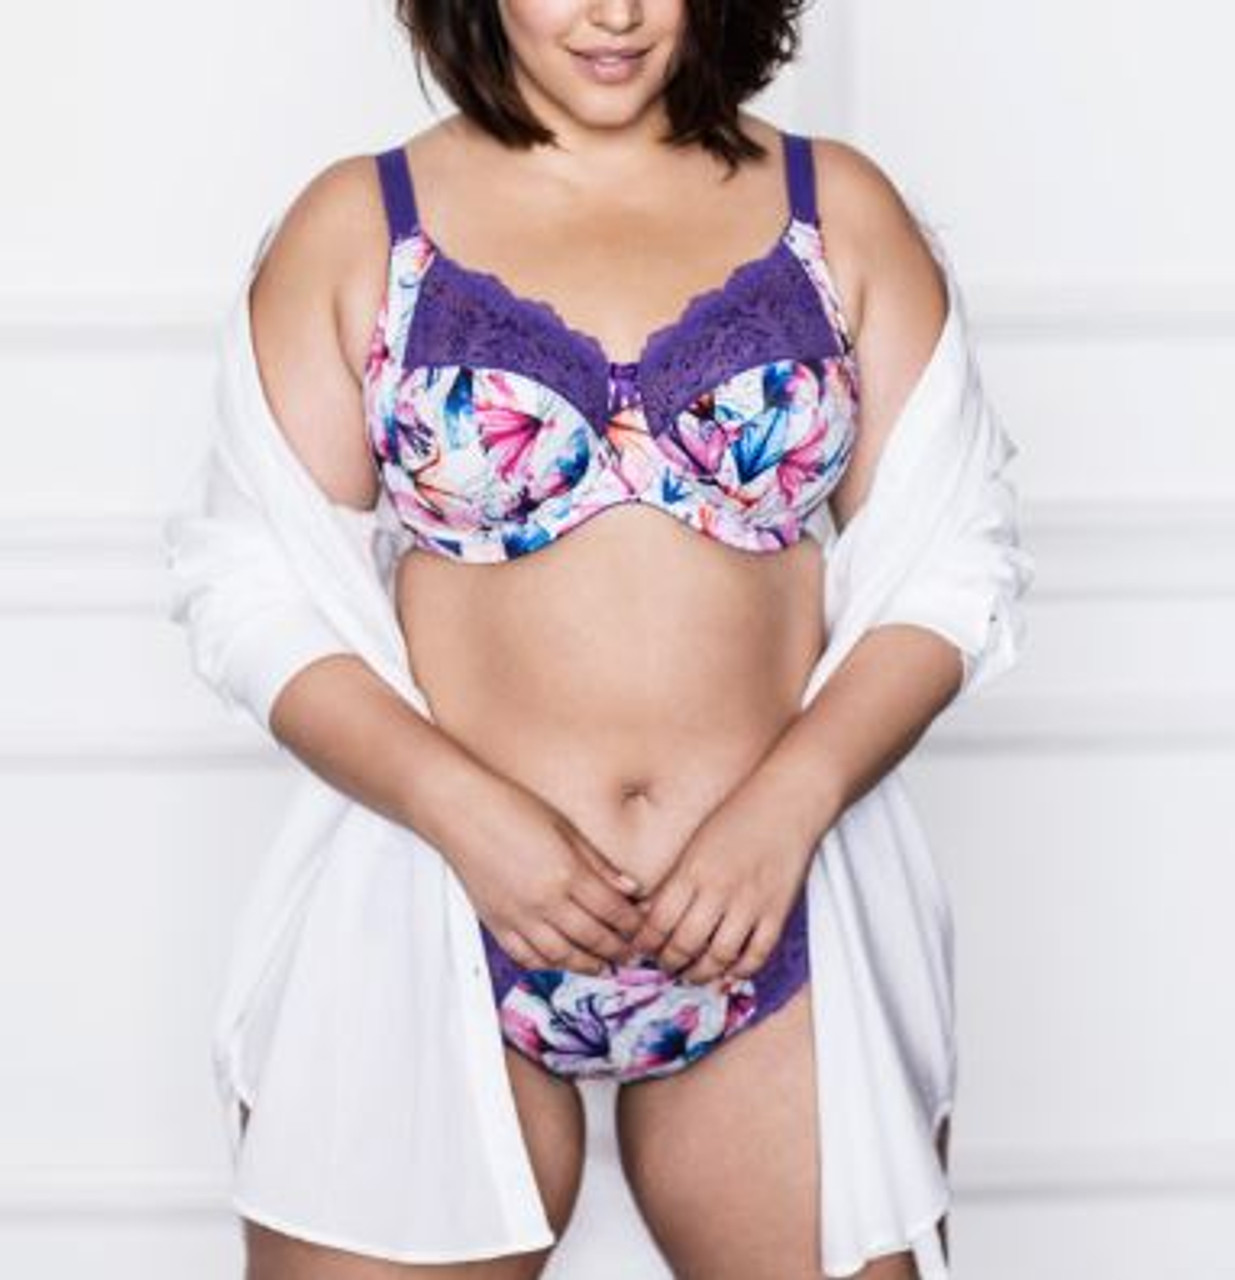 Elomi Morgan Underwire Banded Full Cup Bra in Purple Lily (PUY) FINAL SALE  (75% Off) - Busted Bra Shop